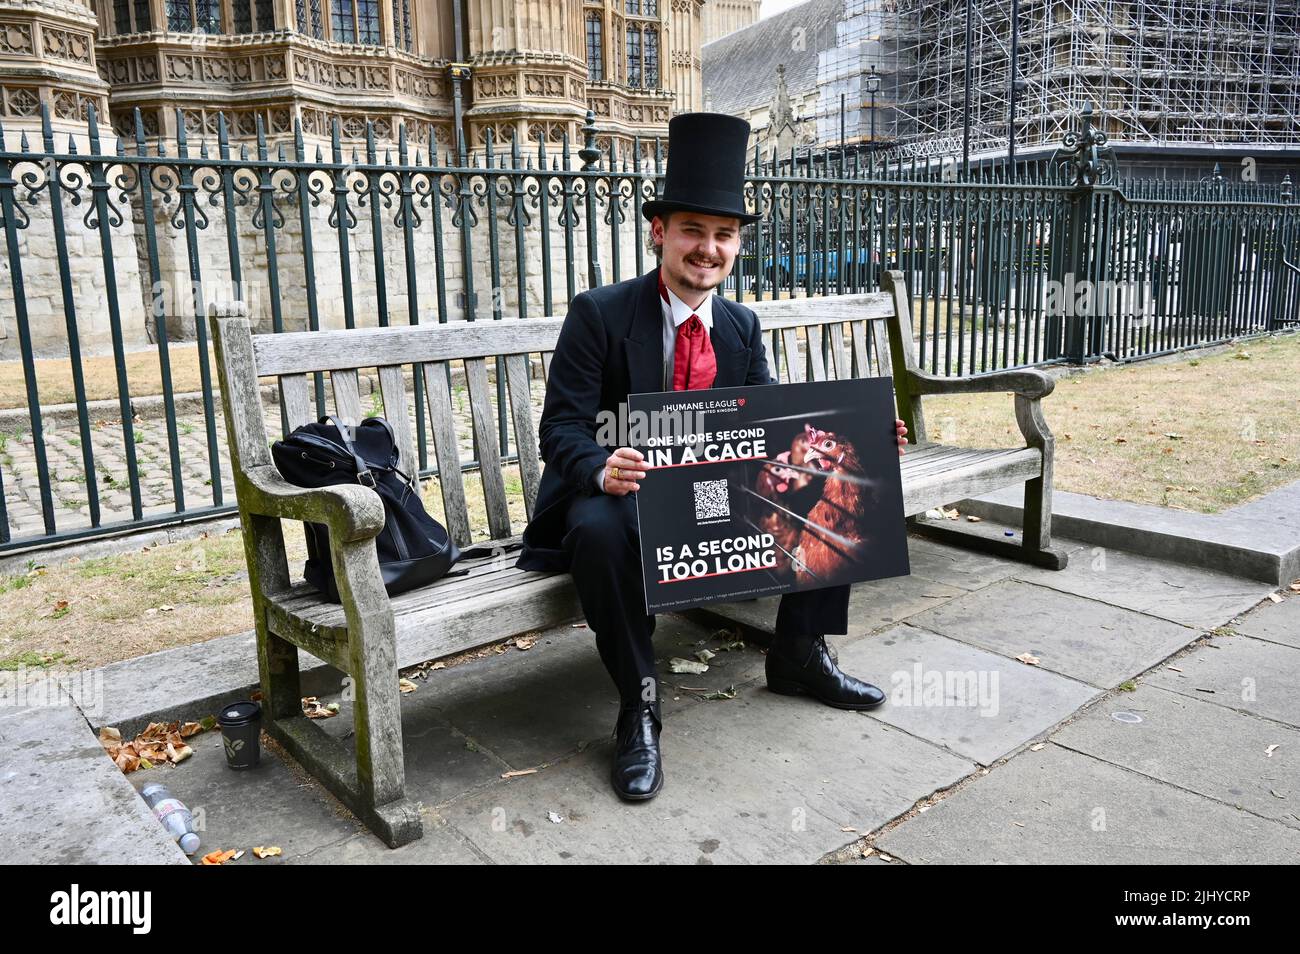 21st July 2022. London, UK. Activists from the Humane League called on the Government to "Make Cages History!" 200 years have passed since the UK's first animal welfare law and yet laying hens remain in cages. Credit: michael melia/Alamy Live News Stock Photo